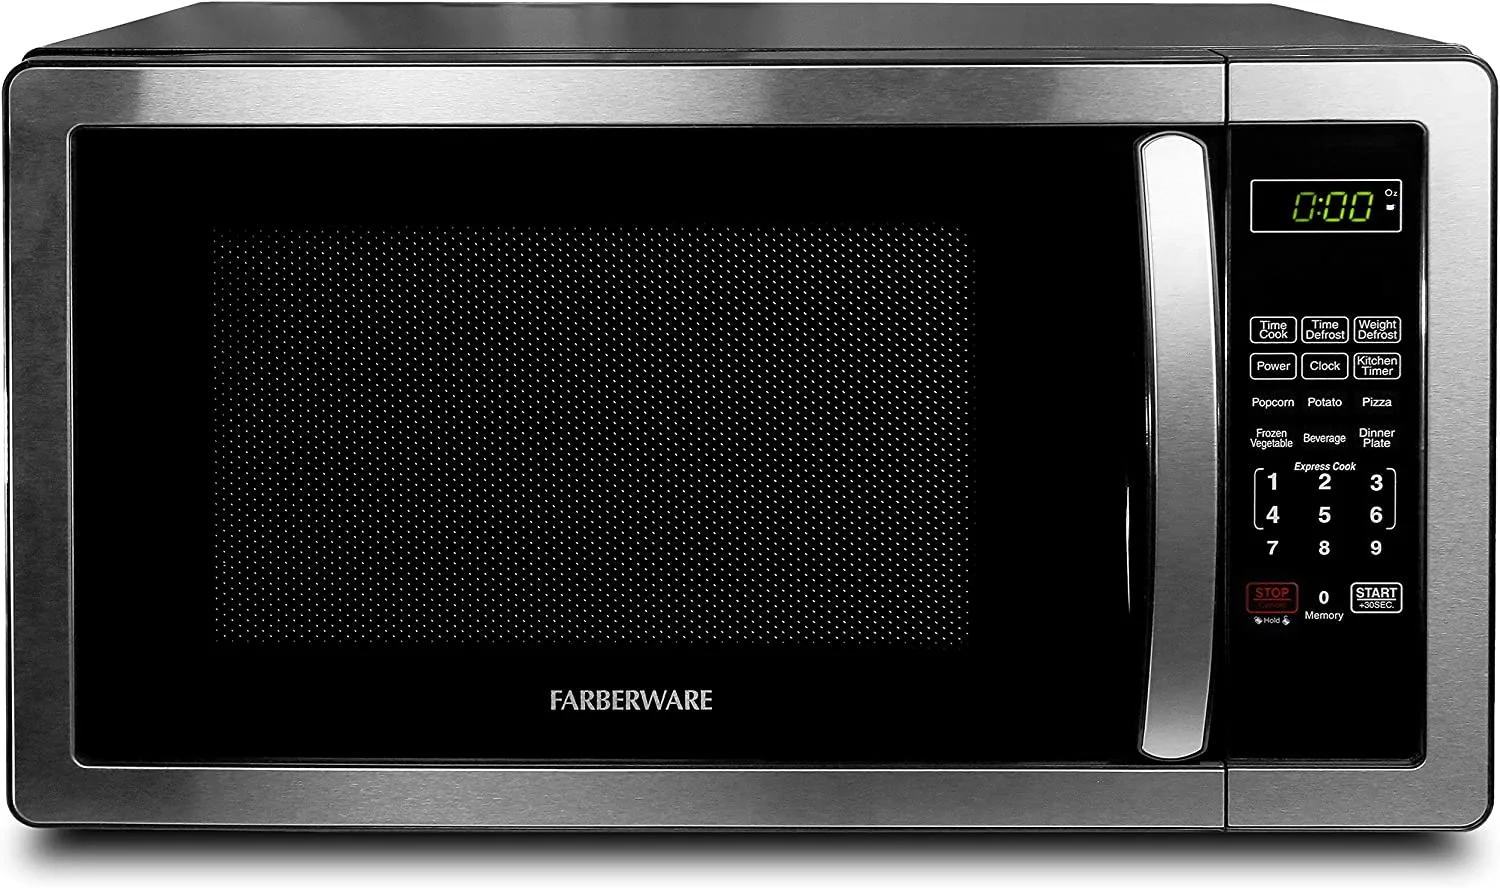 Farberware 1.1 Cubic Feet Stainless Steel Countertop Microwave Oven